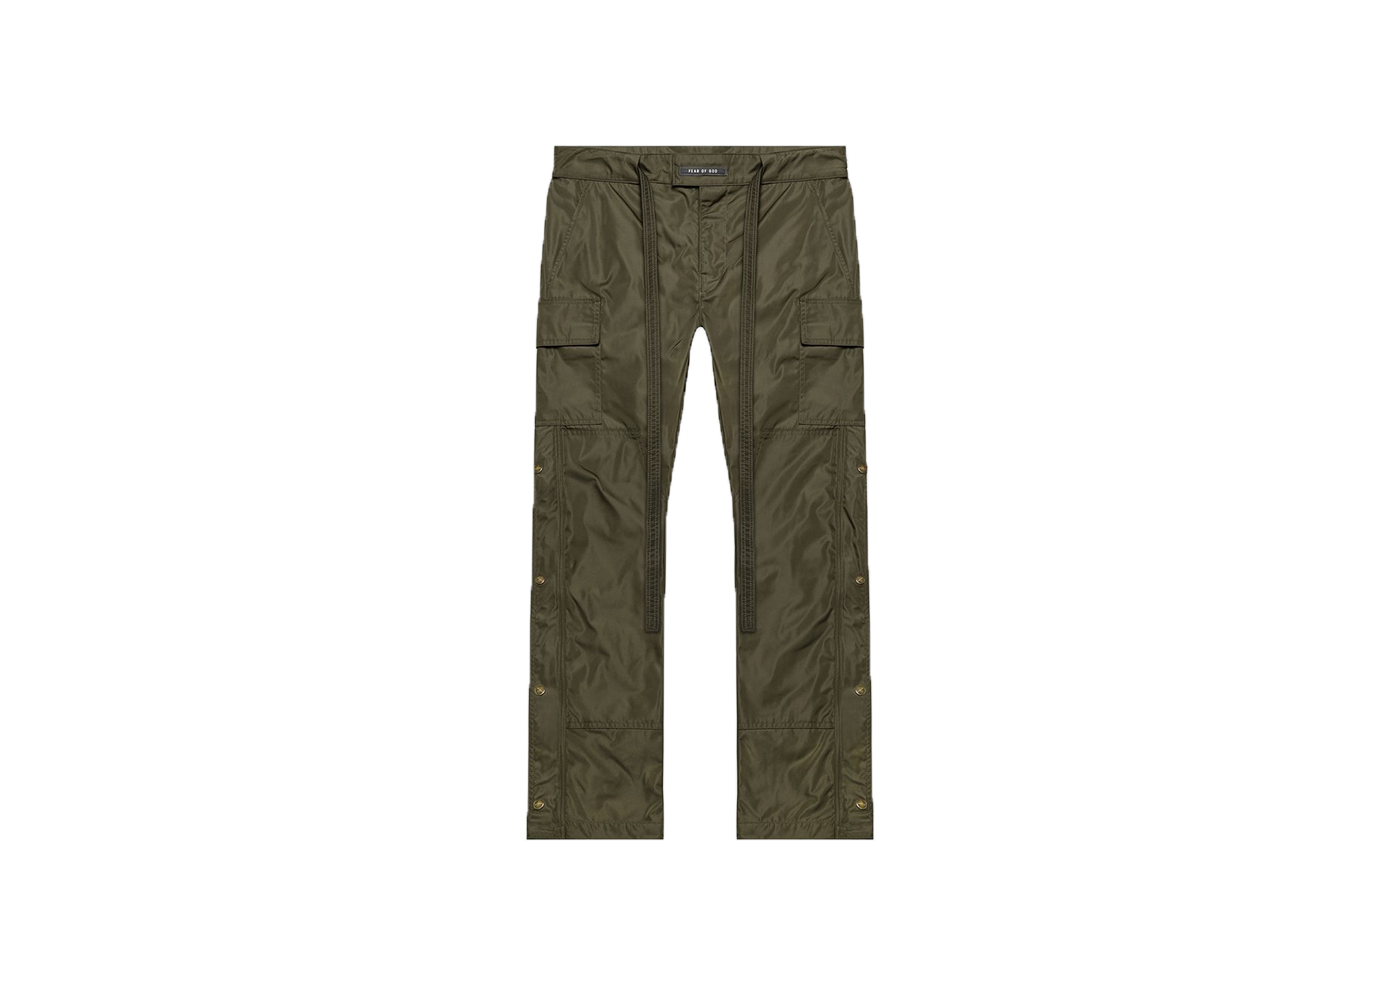 FEAR OF GOD Nylon Cargo Pants Olive Green - Sixth Collection - US